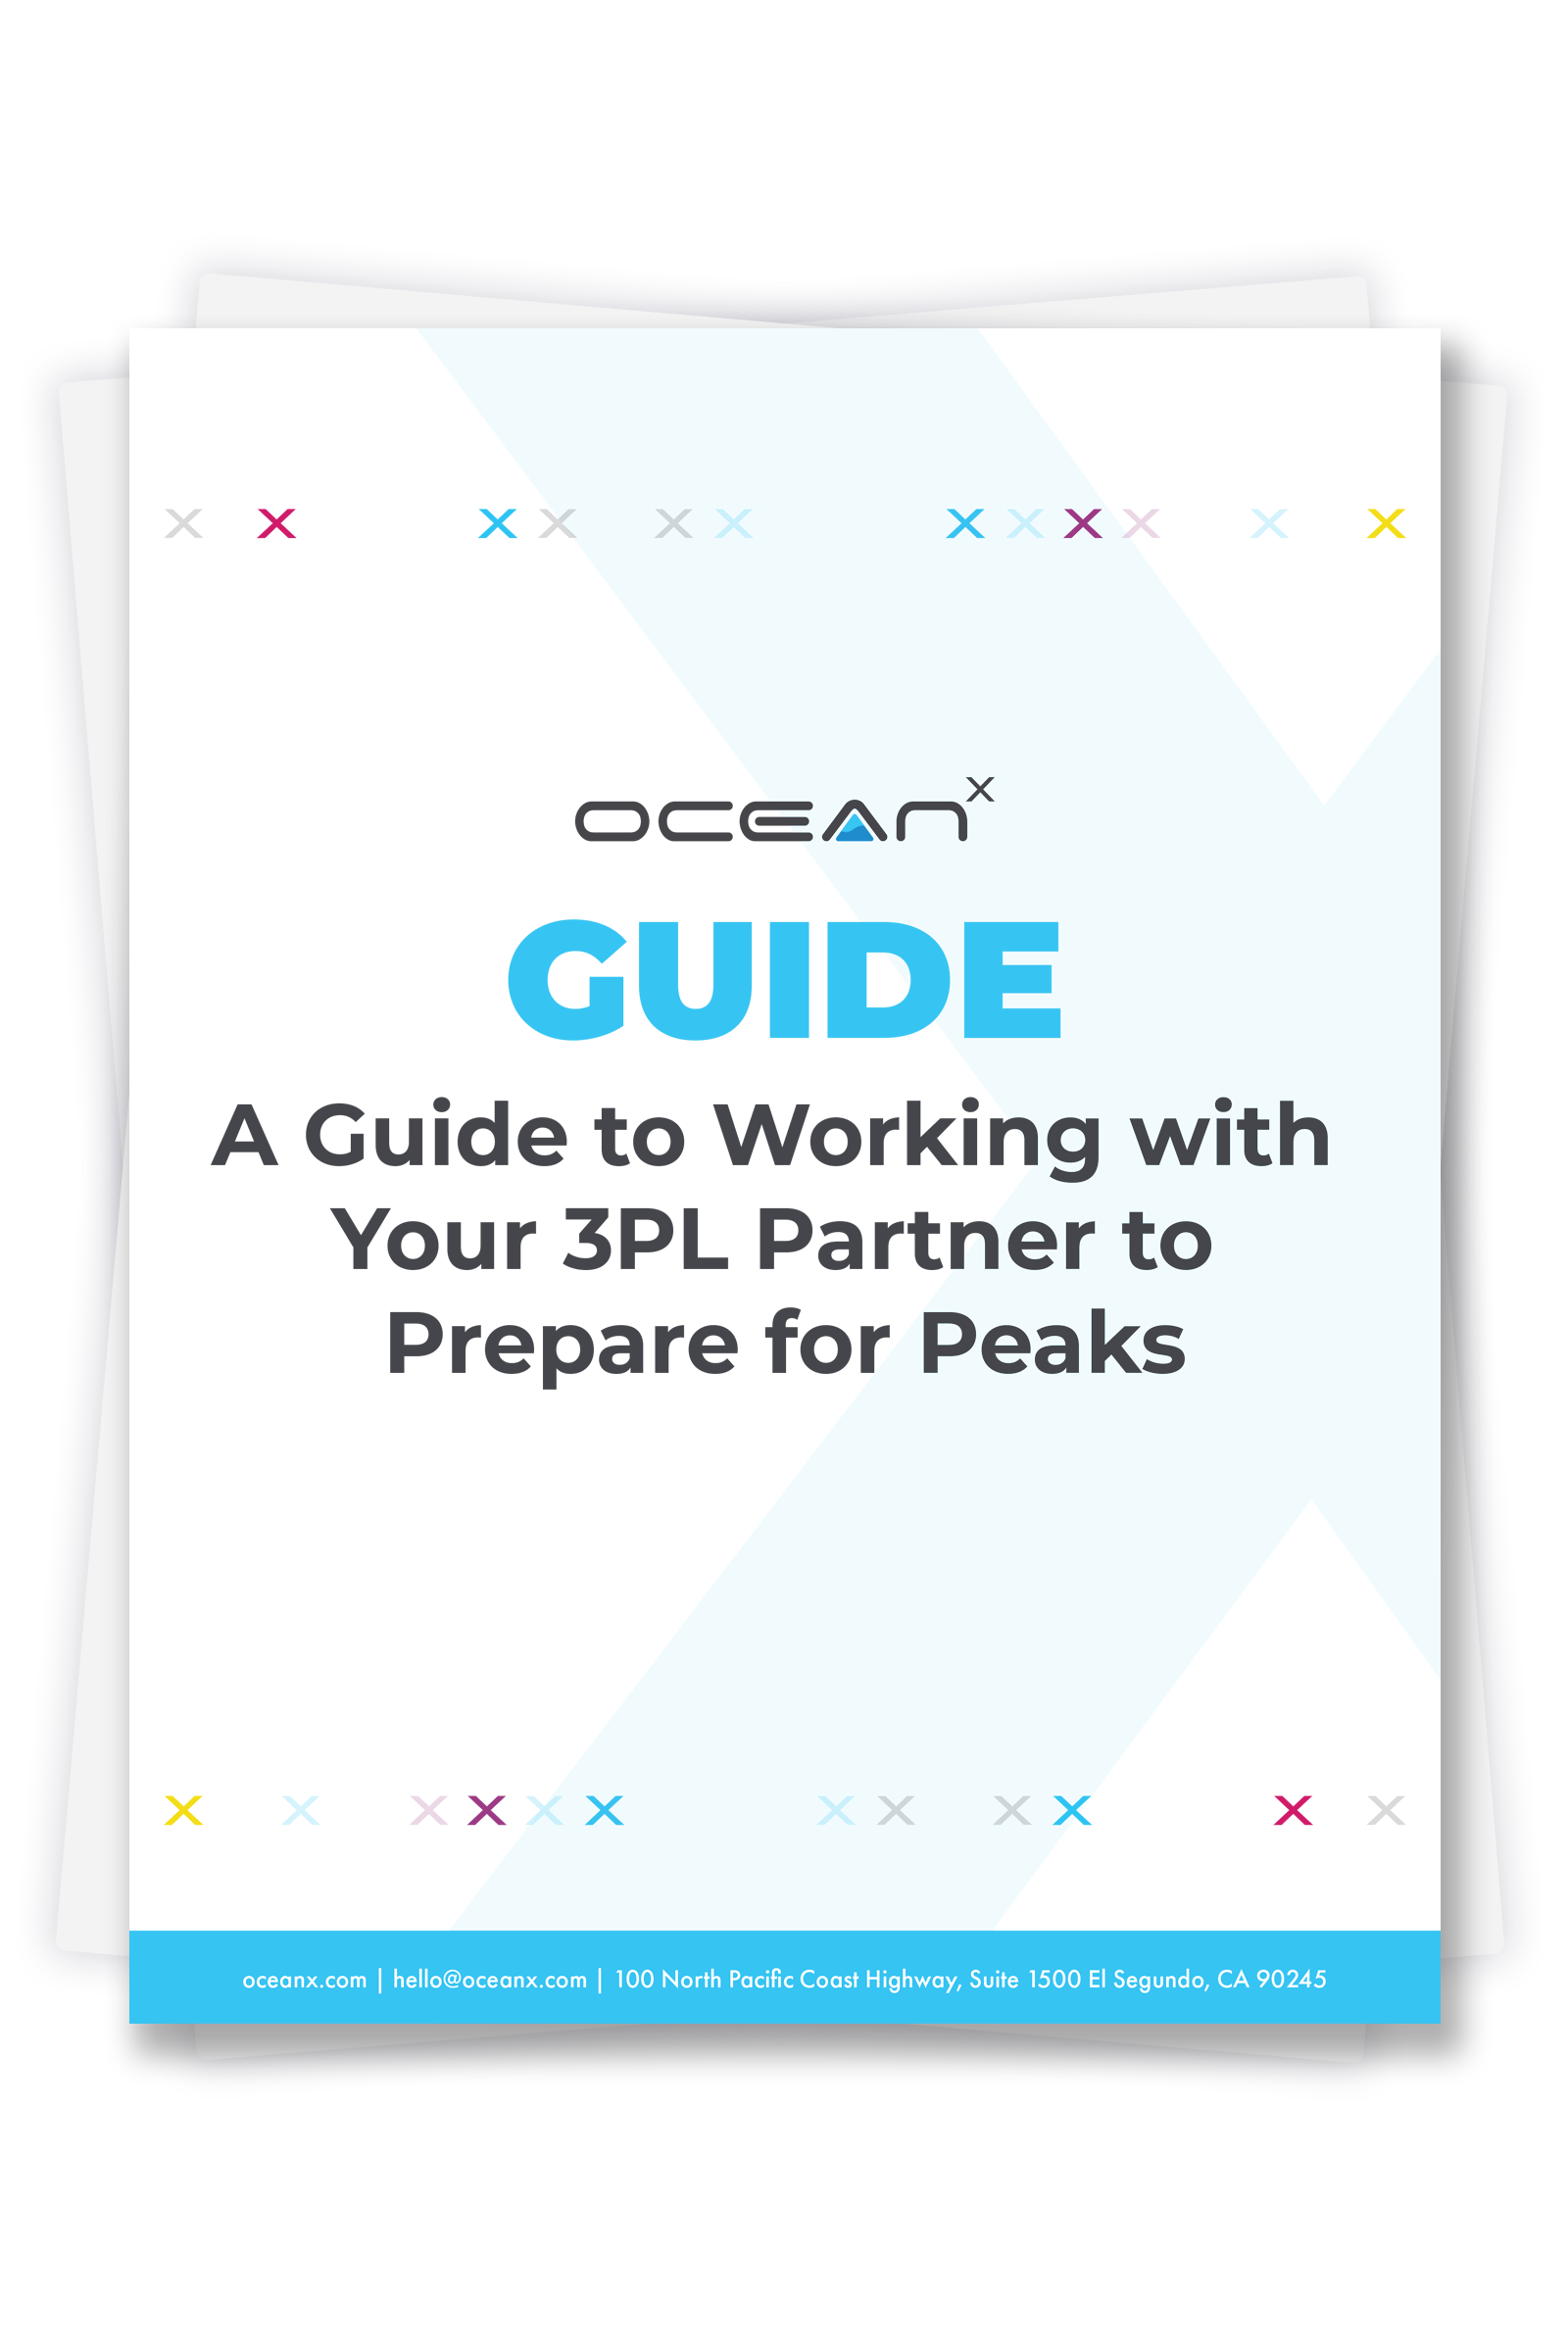 Guide Cover Image: Working with Your 3PL Partner to Prepare for Peaks